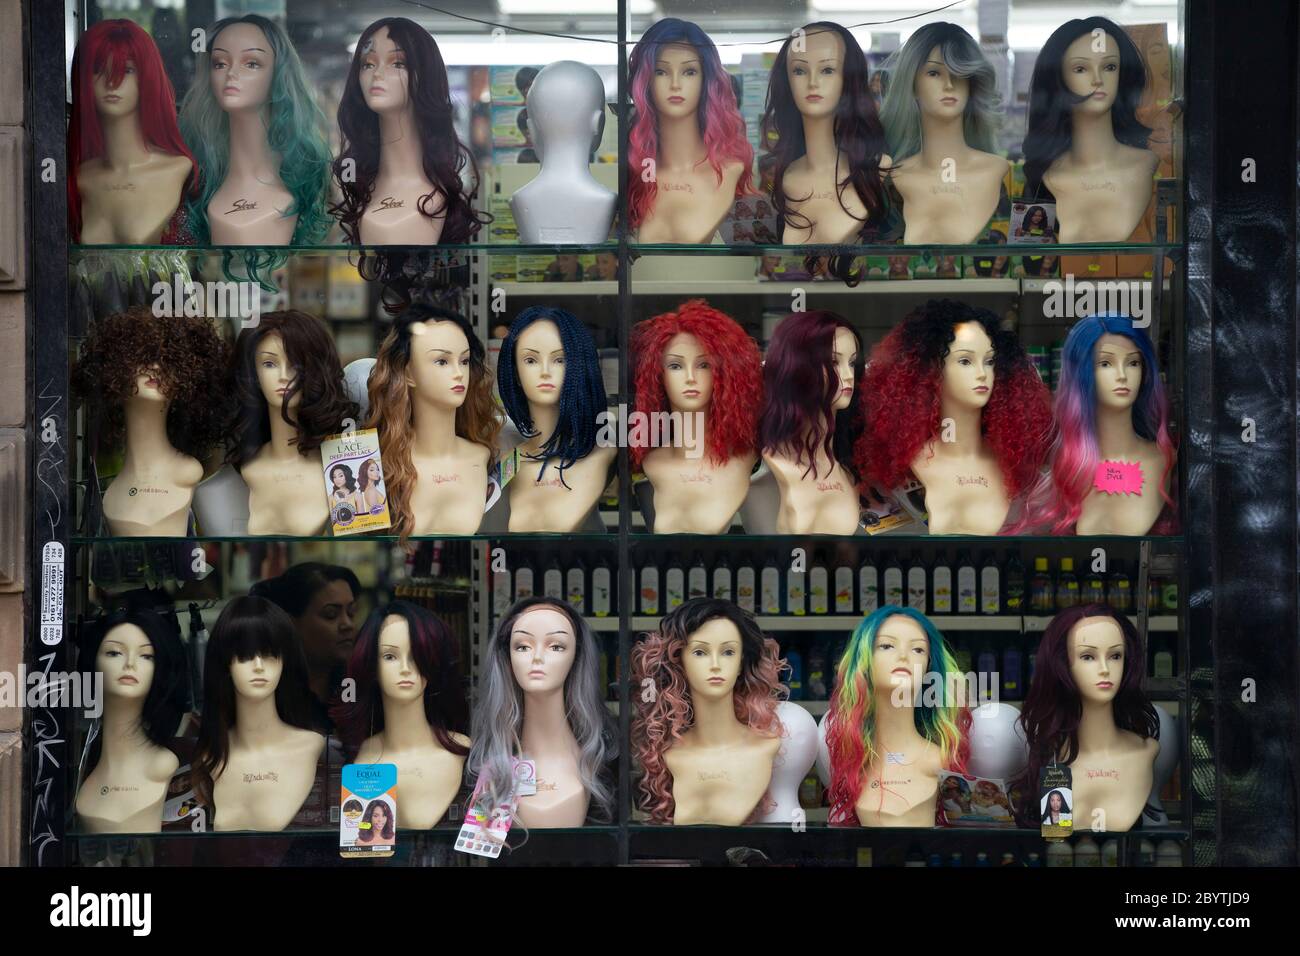 Manchester, UK. 10th June, 2020. Wigs are seen for sale in a shop window in the Northern Quarter, Manchester, UK. Credit: Jon Super/Alamy Stock Photo